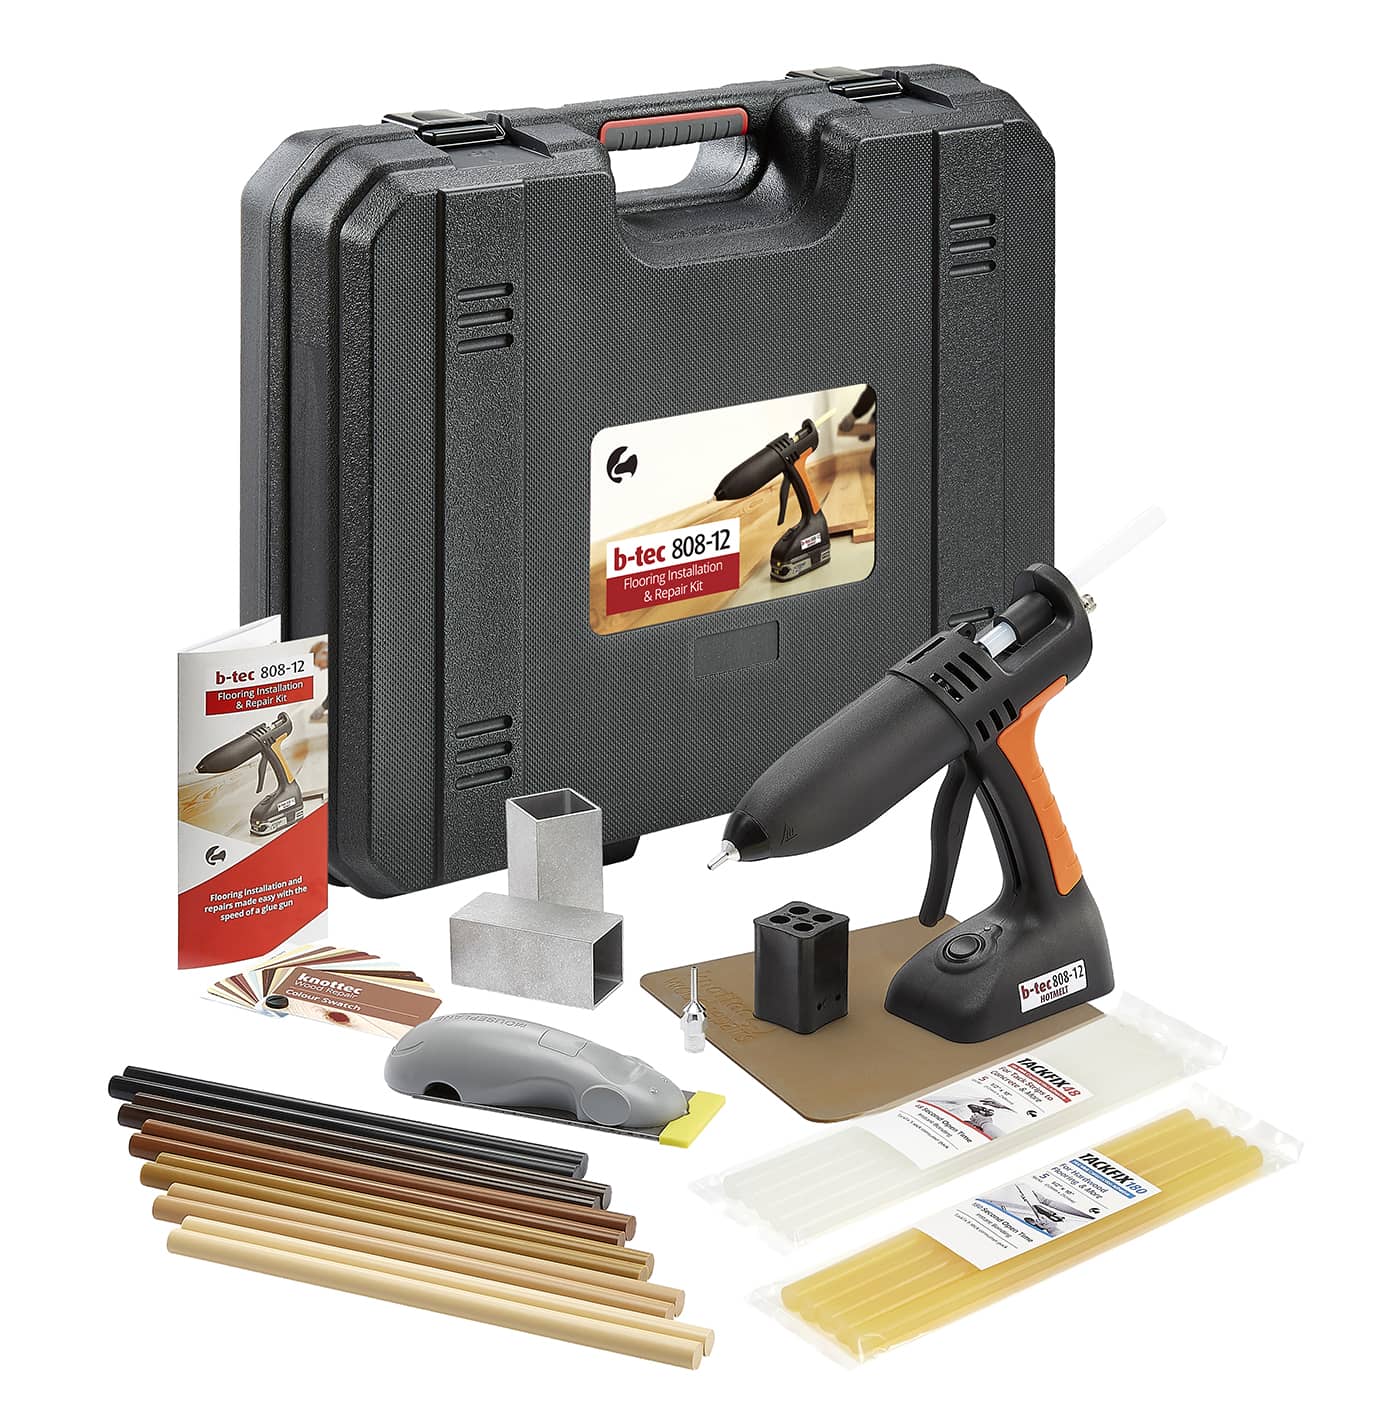 Tec 808-12 battery powered repair and installation kit, battery and charger sold separately